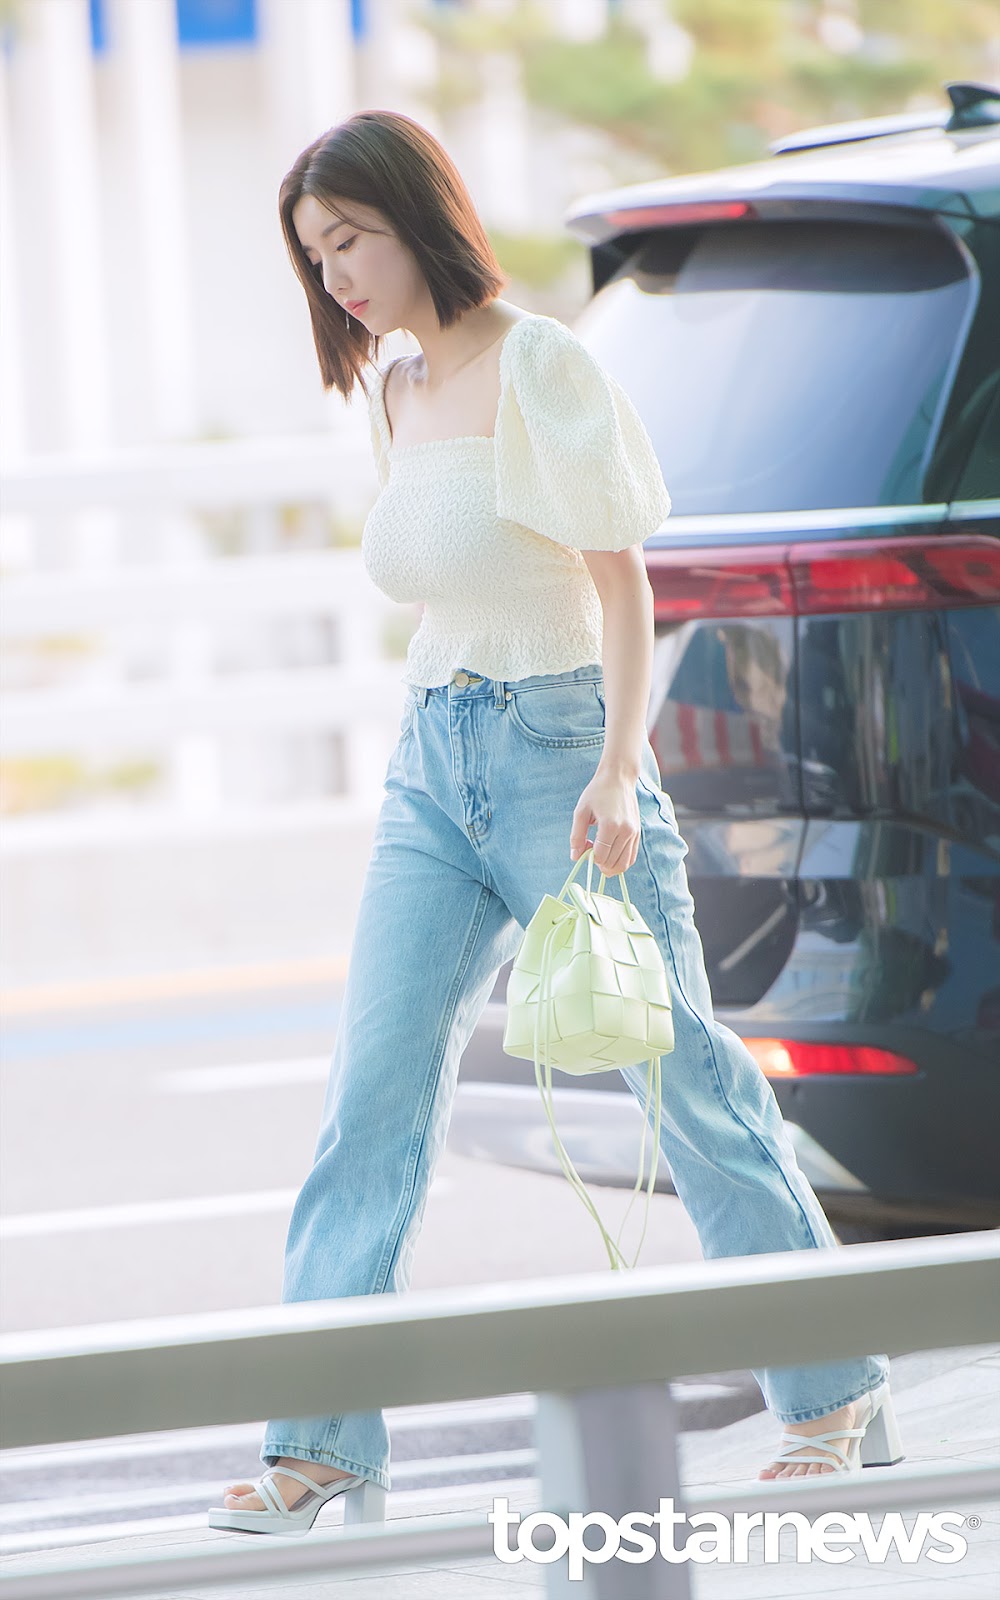 Kwon Eunbi's aggressive volume and beauty is emphasized. Airport fashion legend